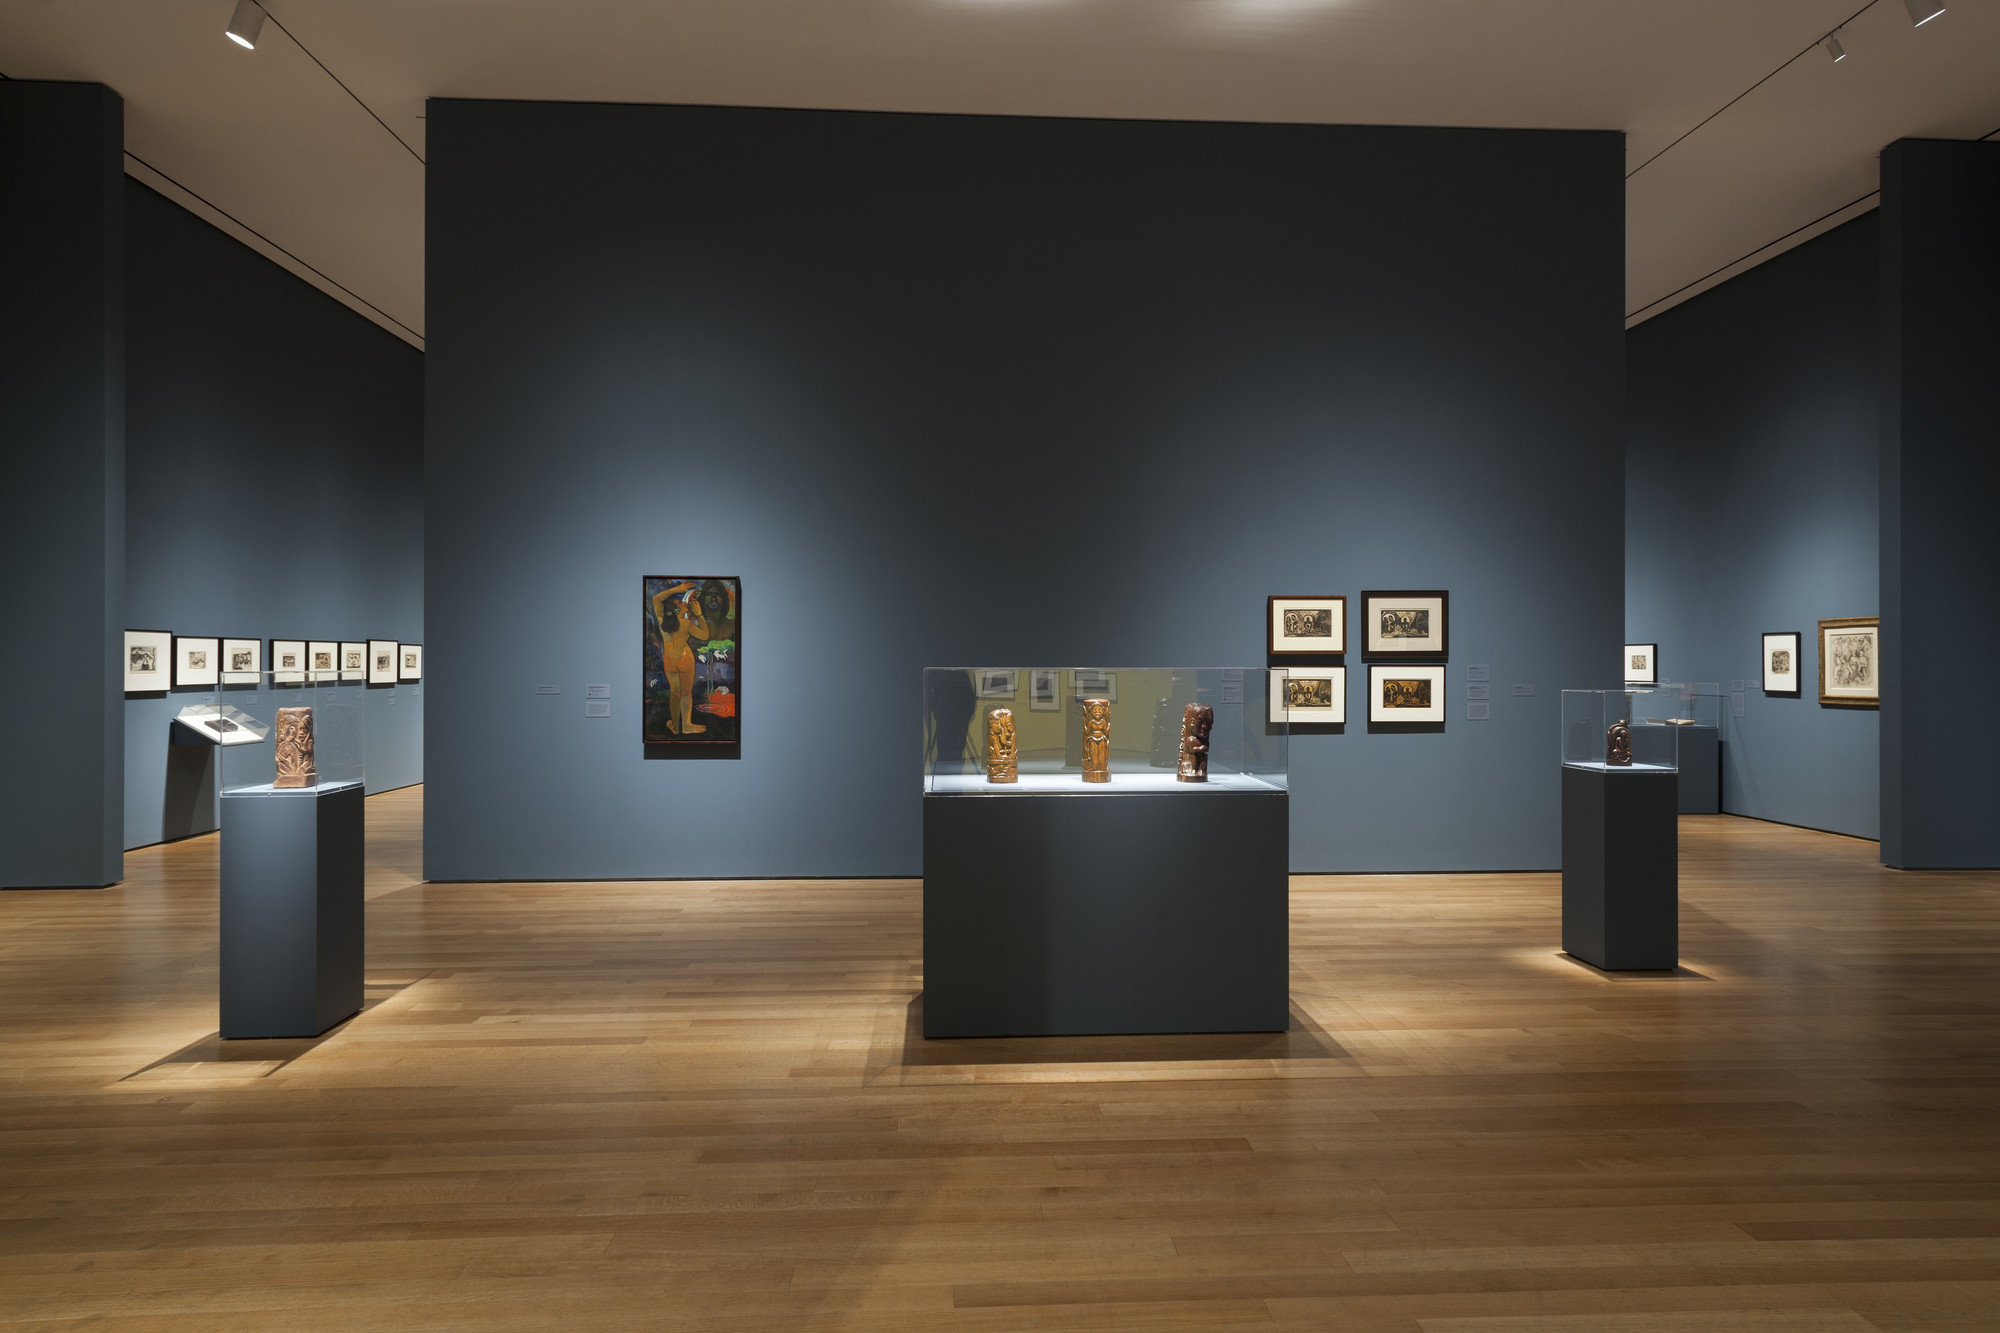 Installation view of the exhibition "Gauguin Metamorphoses" MoMA